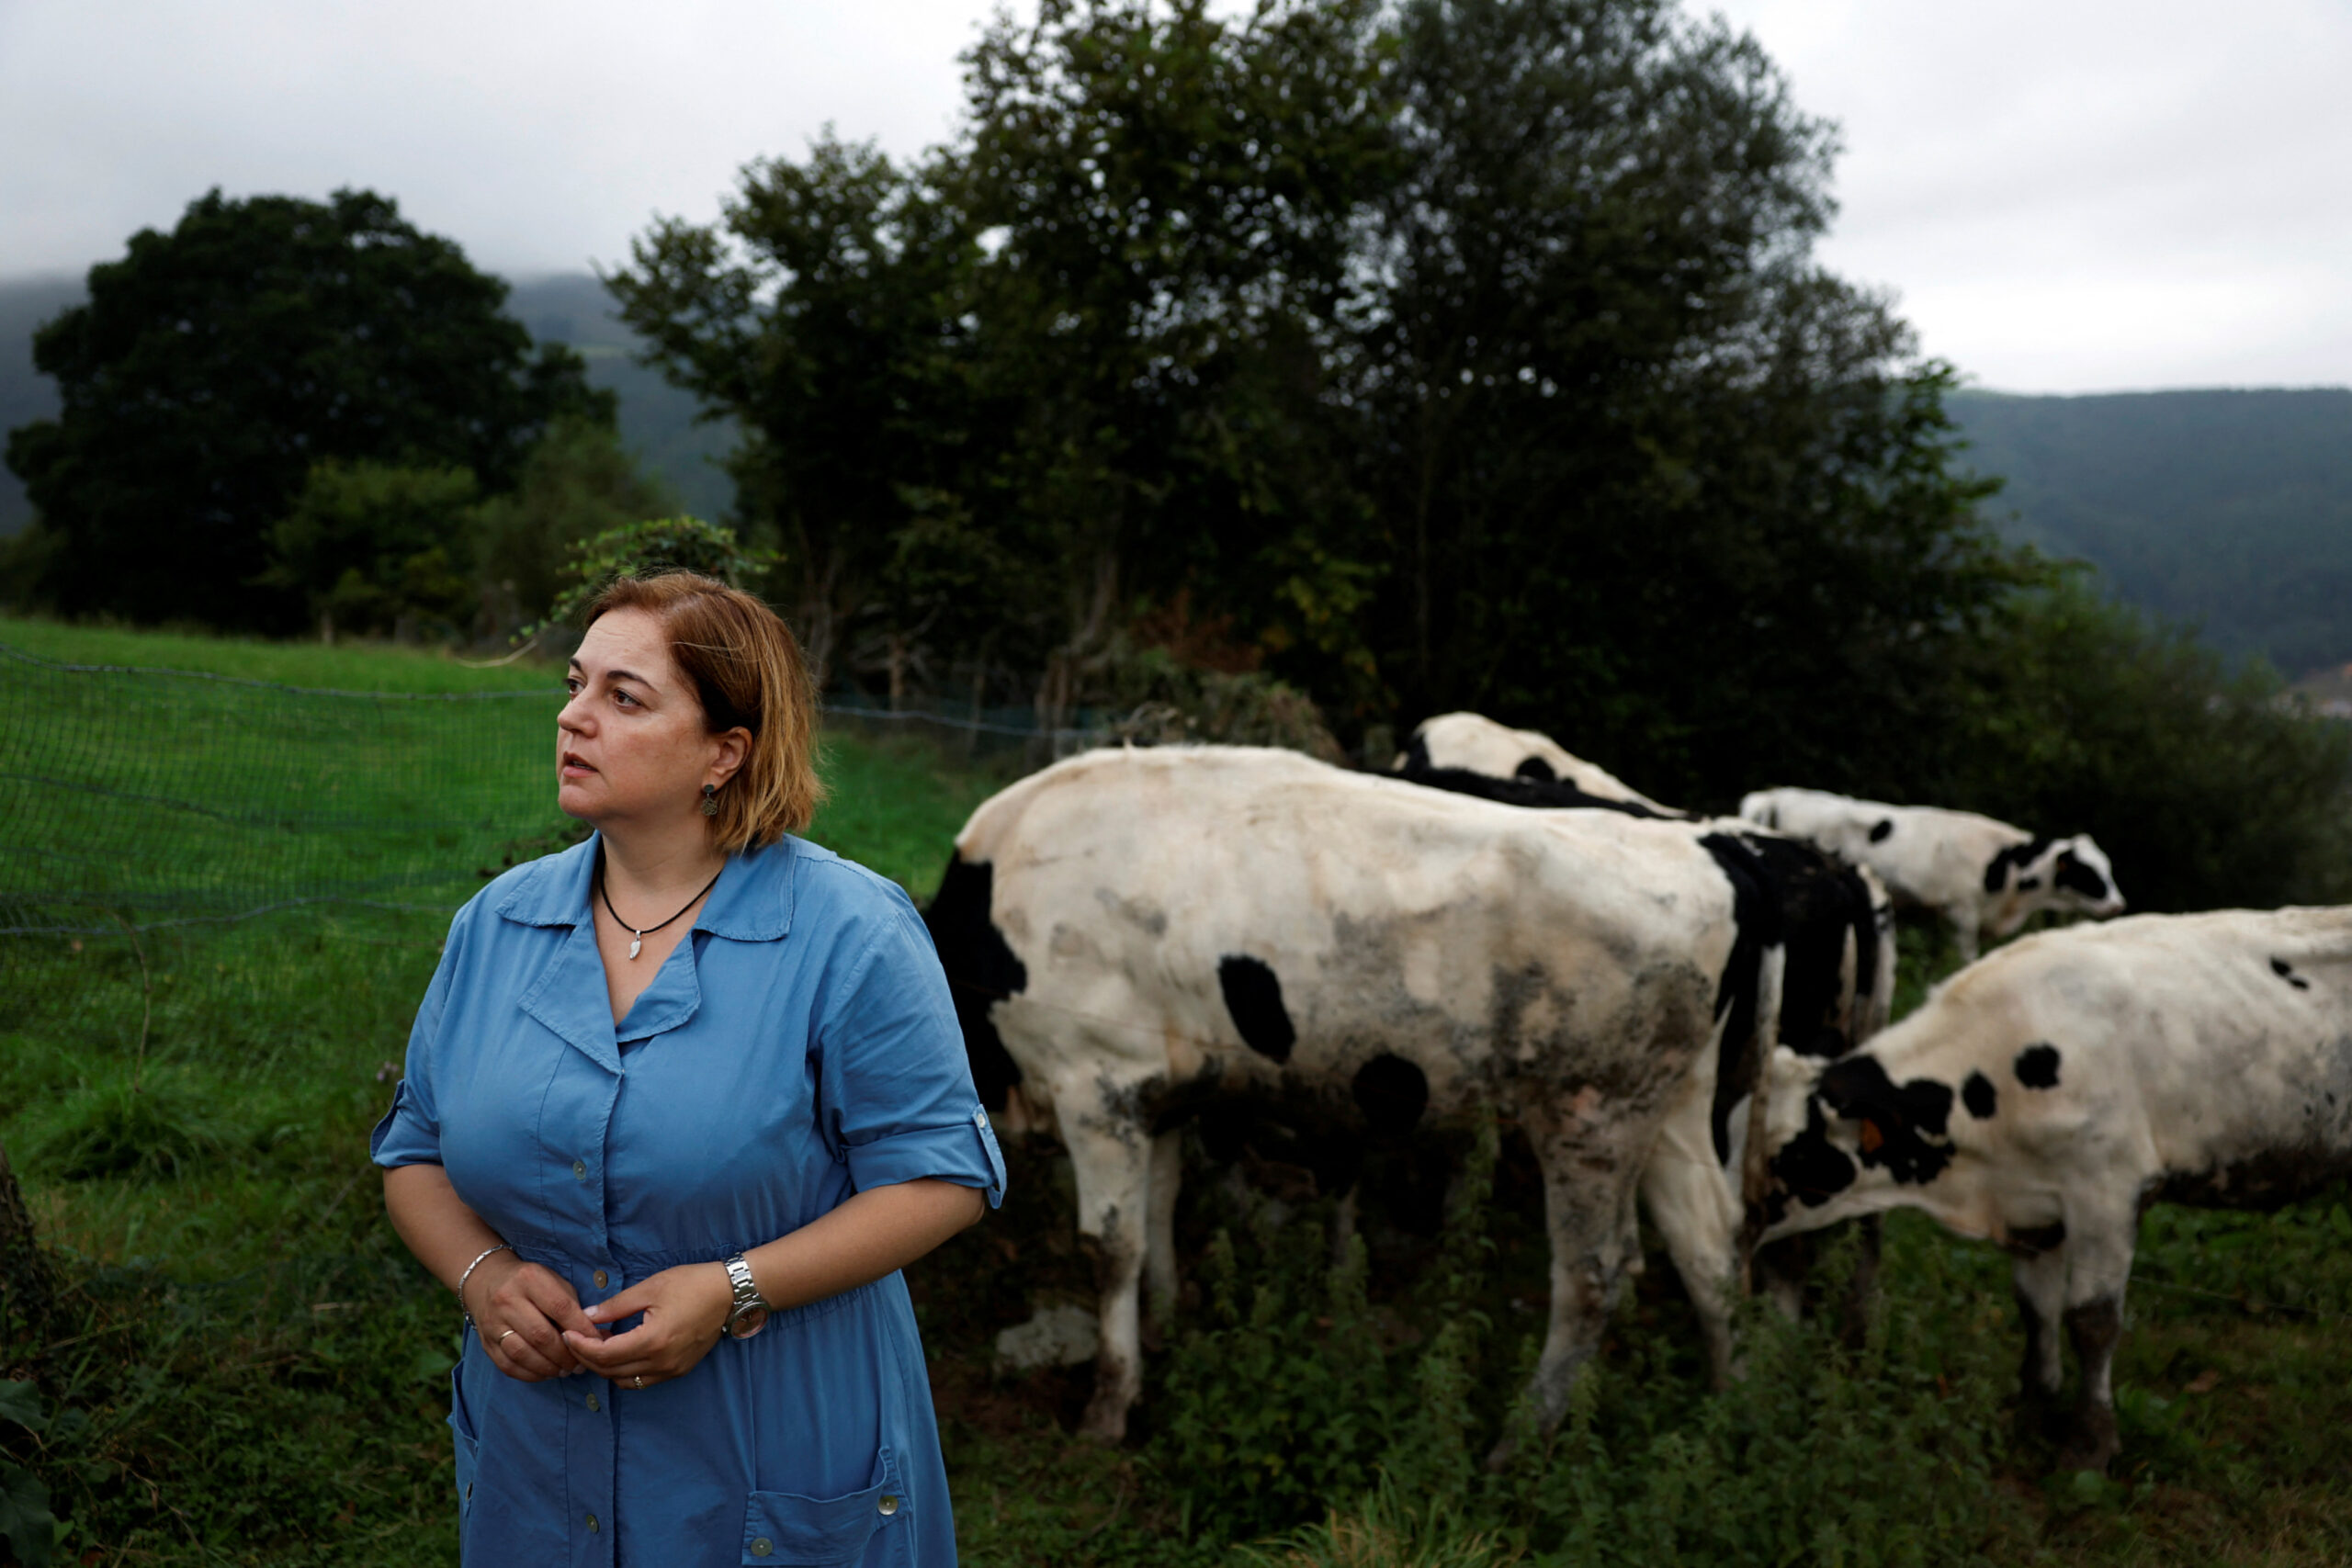 Spain braces for wildfires as beef farmers battle red tape